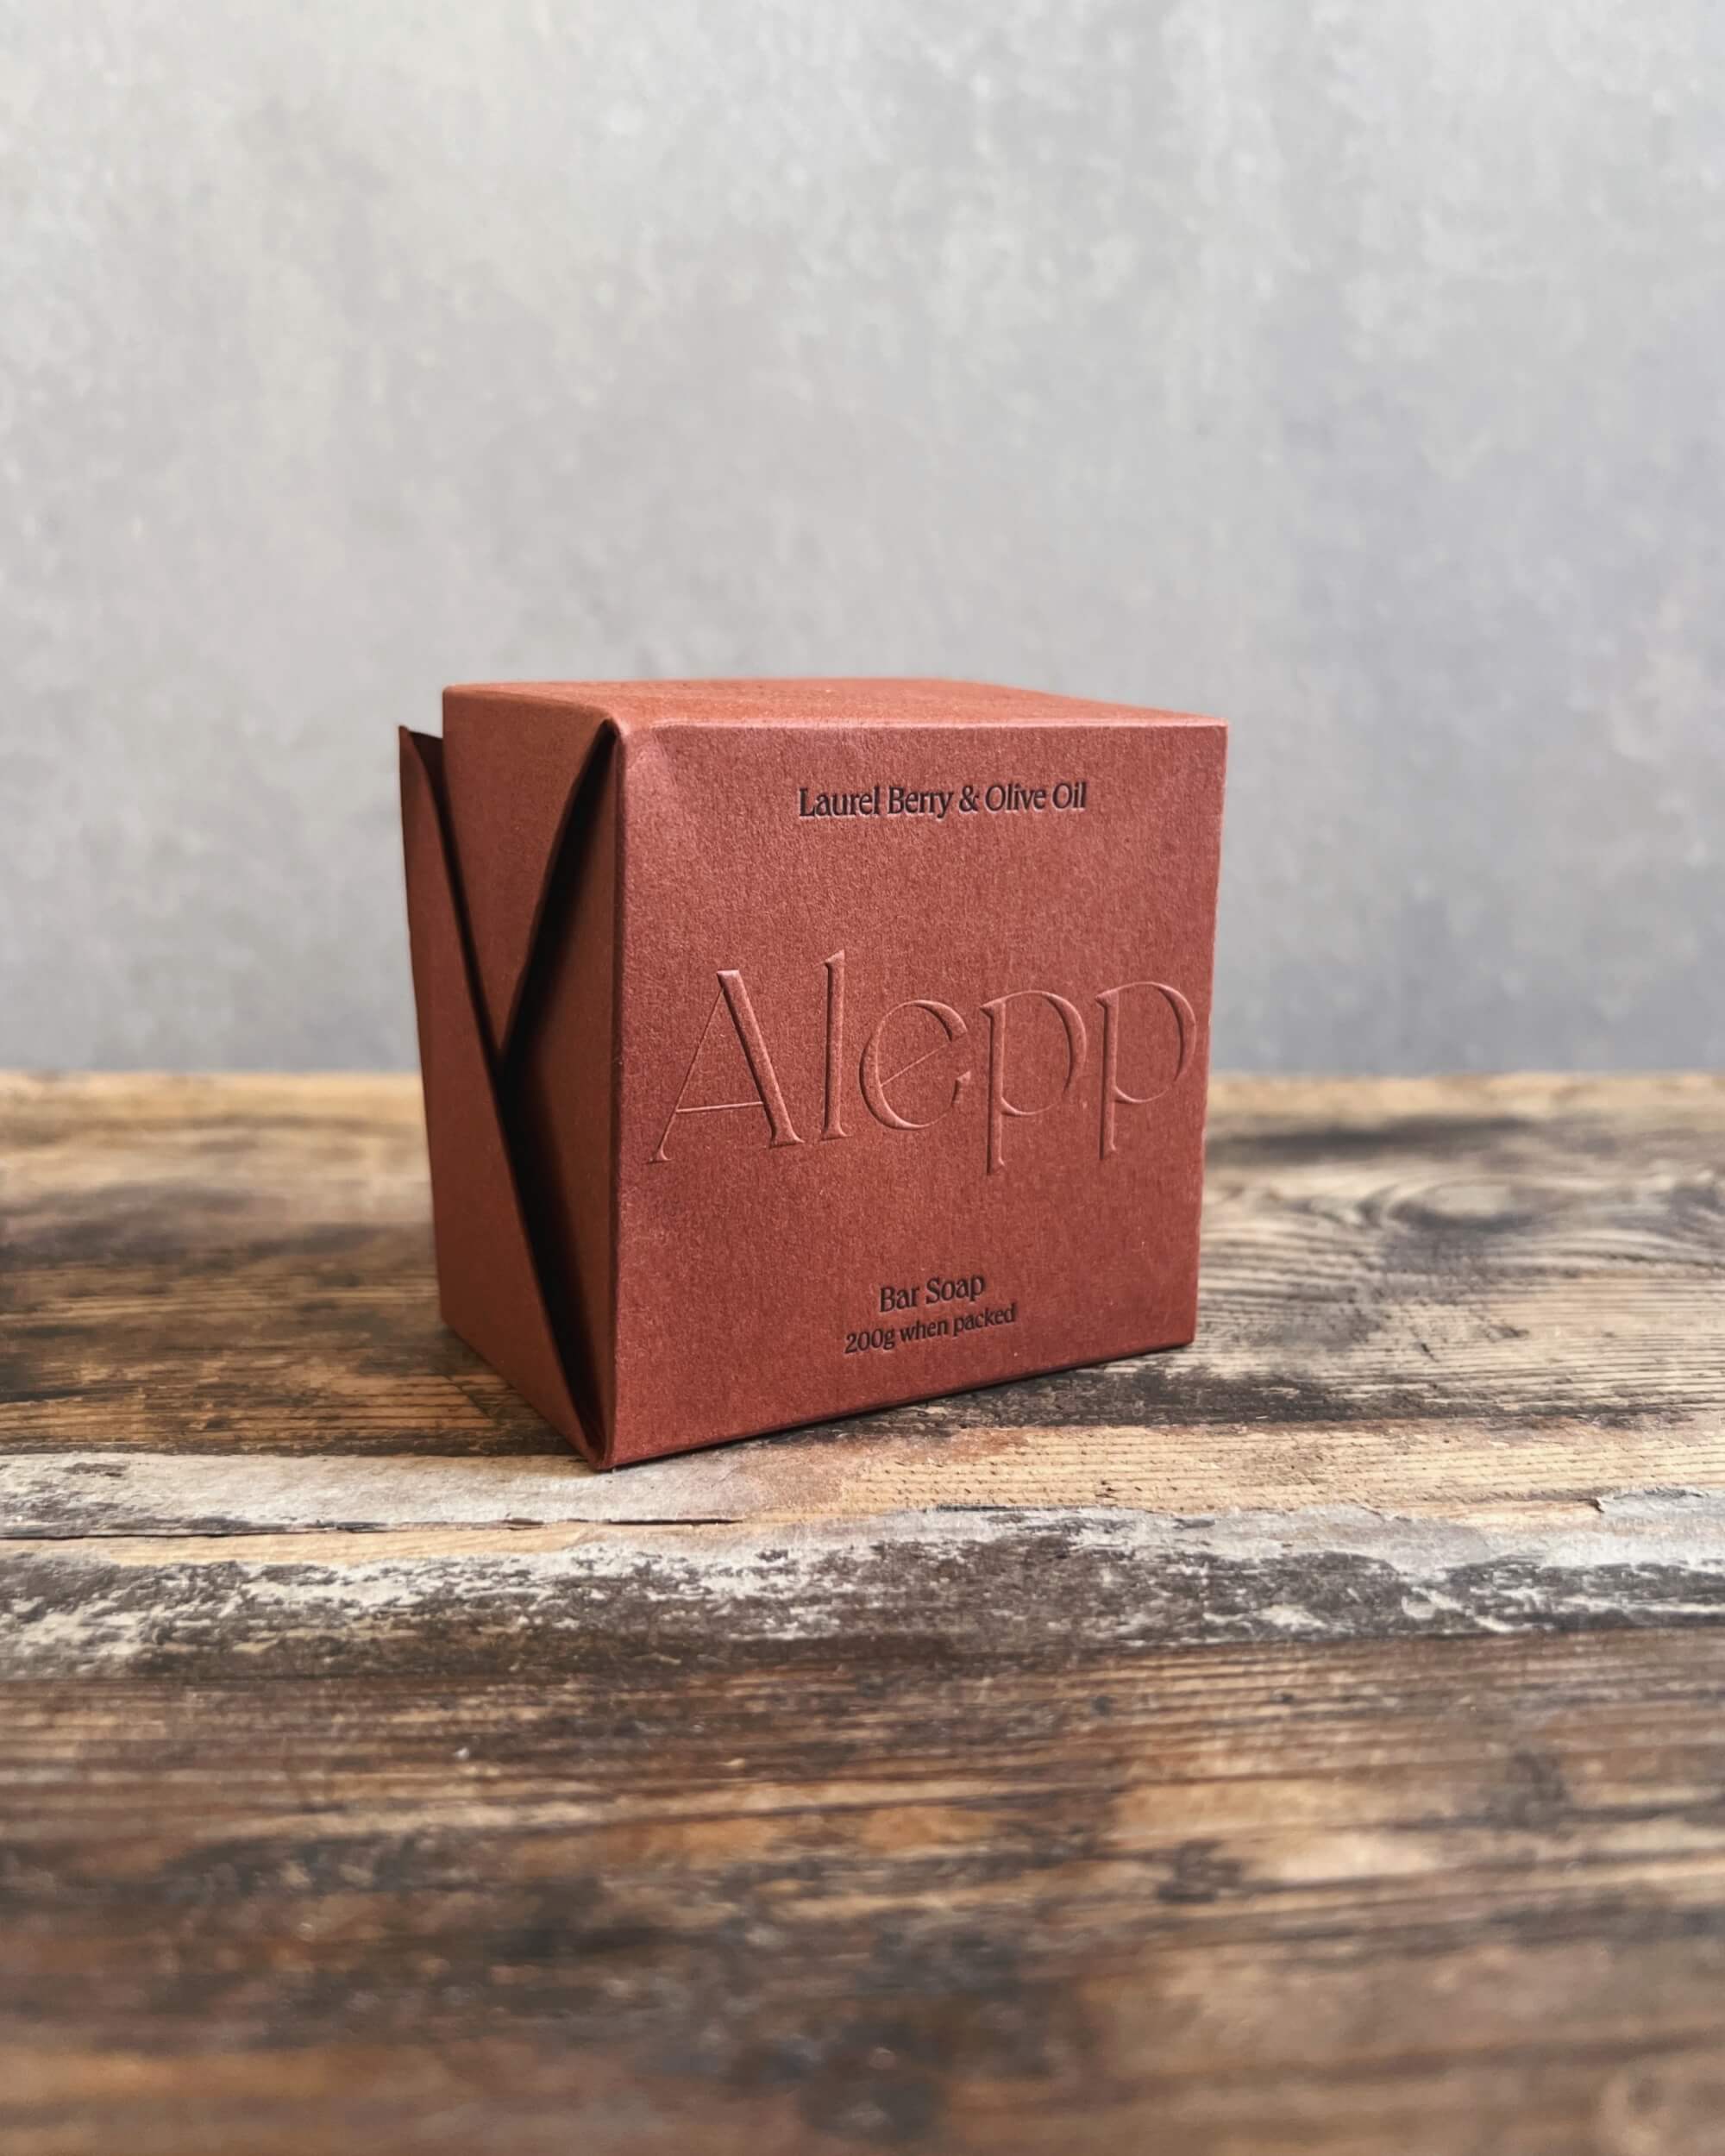 100% of profits from Alepp are donated to programs supporting vulnerable asylum seekers and refugees in Australia . handmade soap from syria